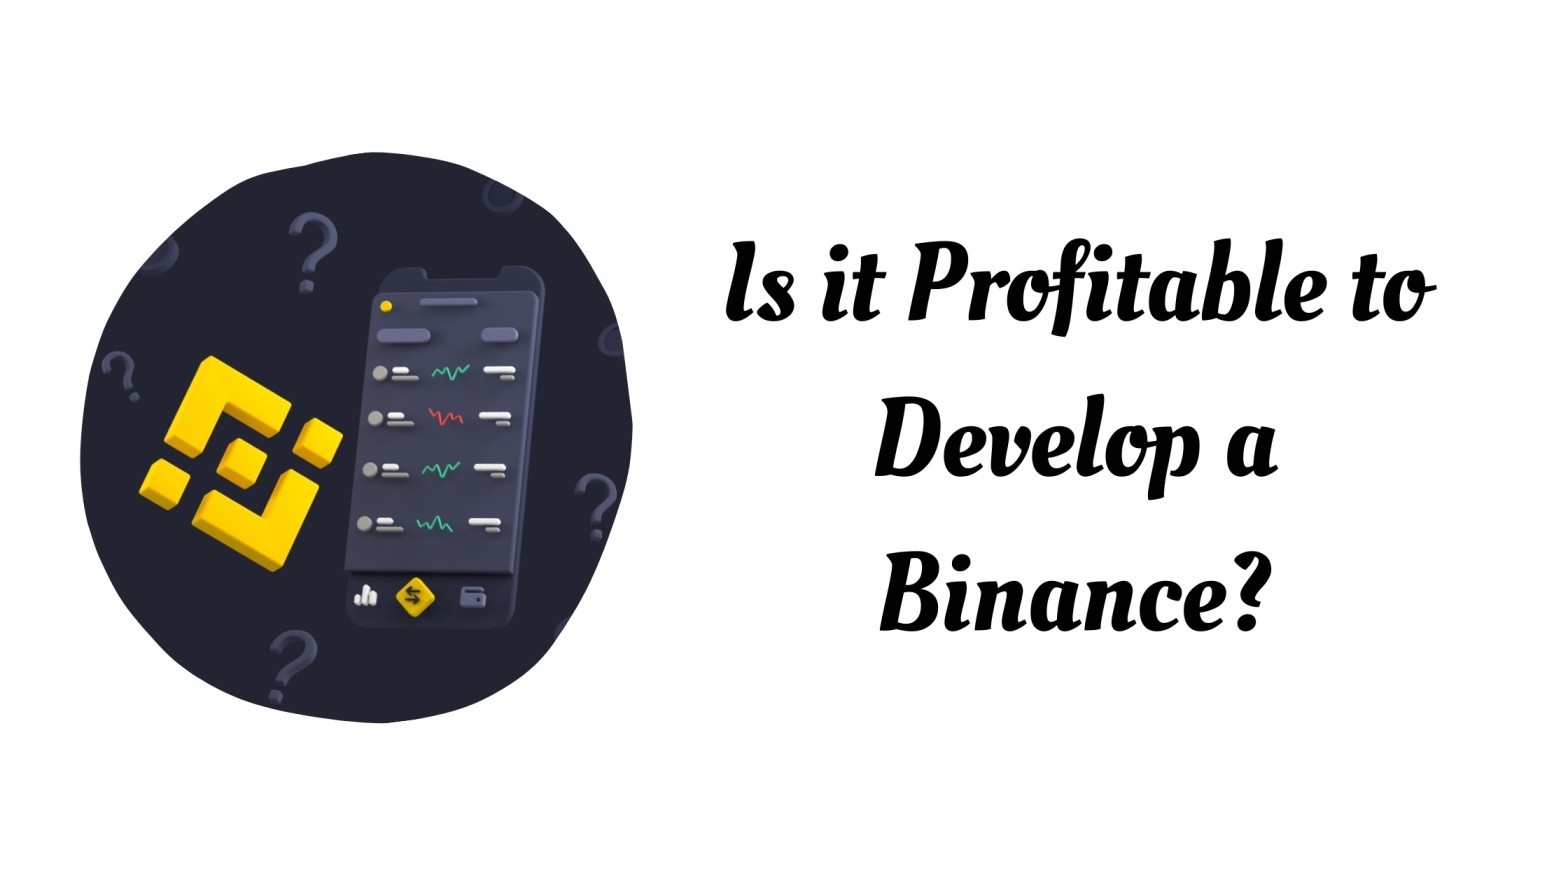 is it profitable to develop a binance